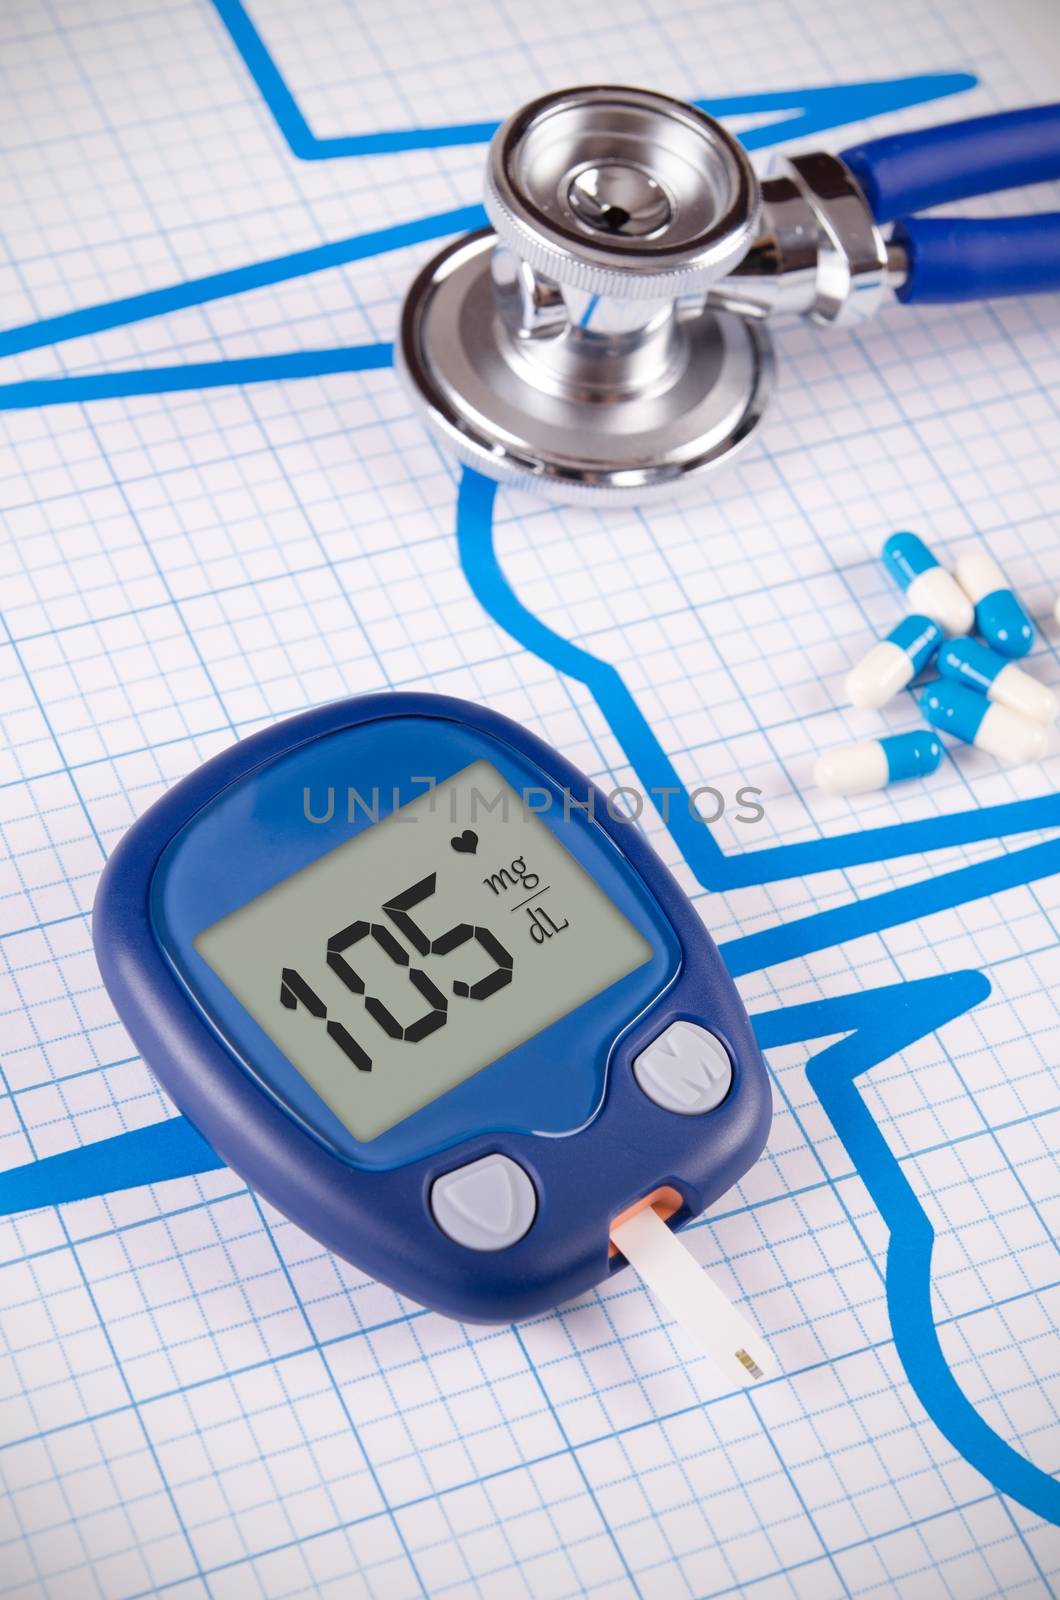 Glucometer and stethoscope on medical background